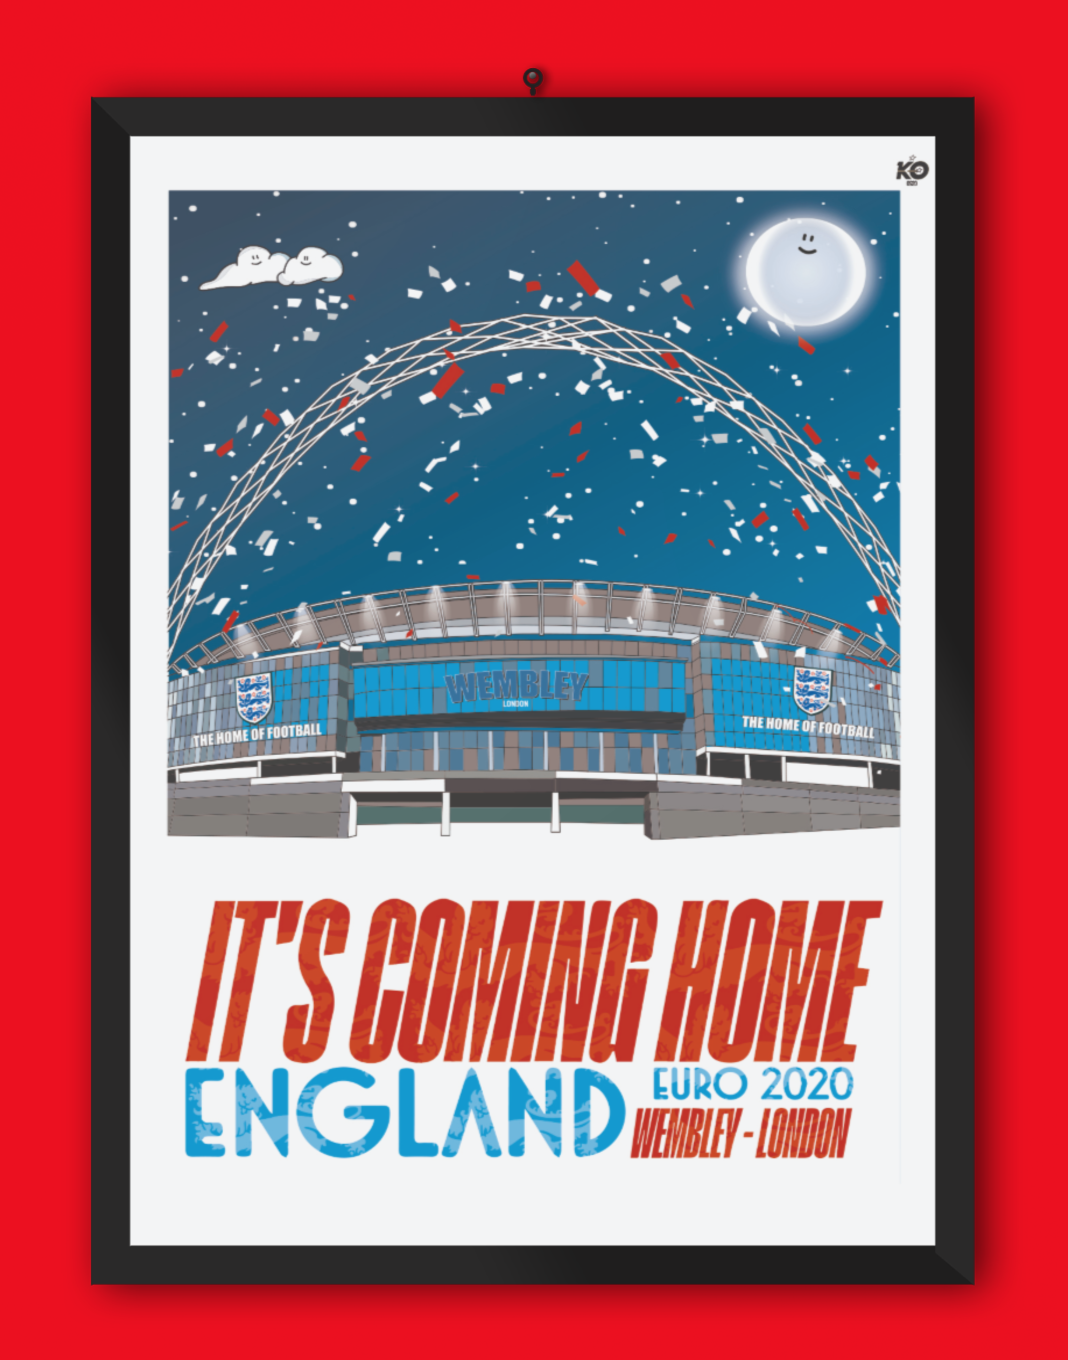 It's coming home